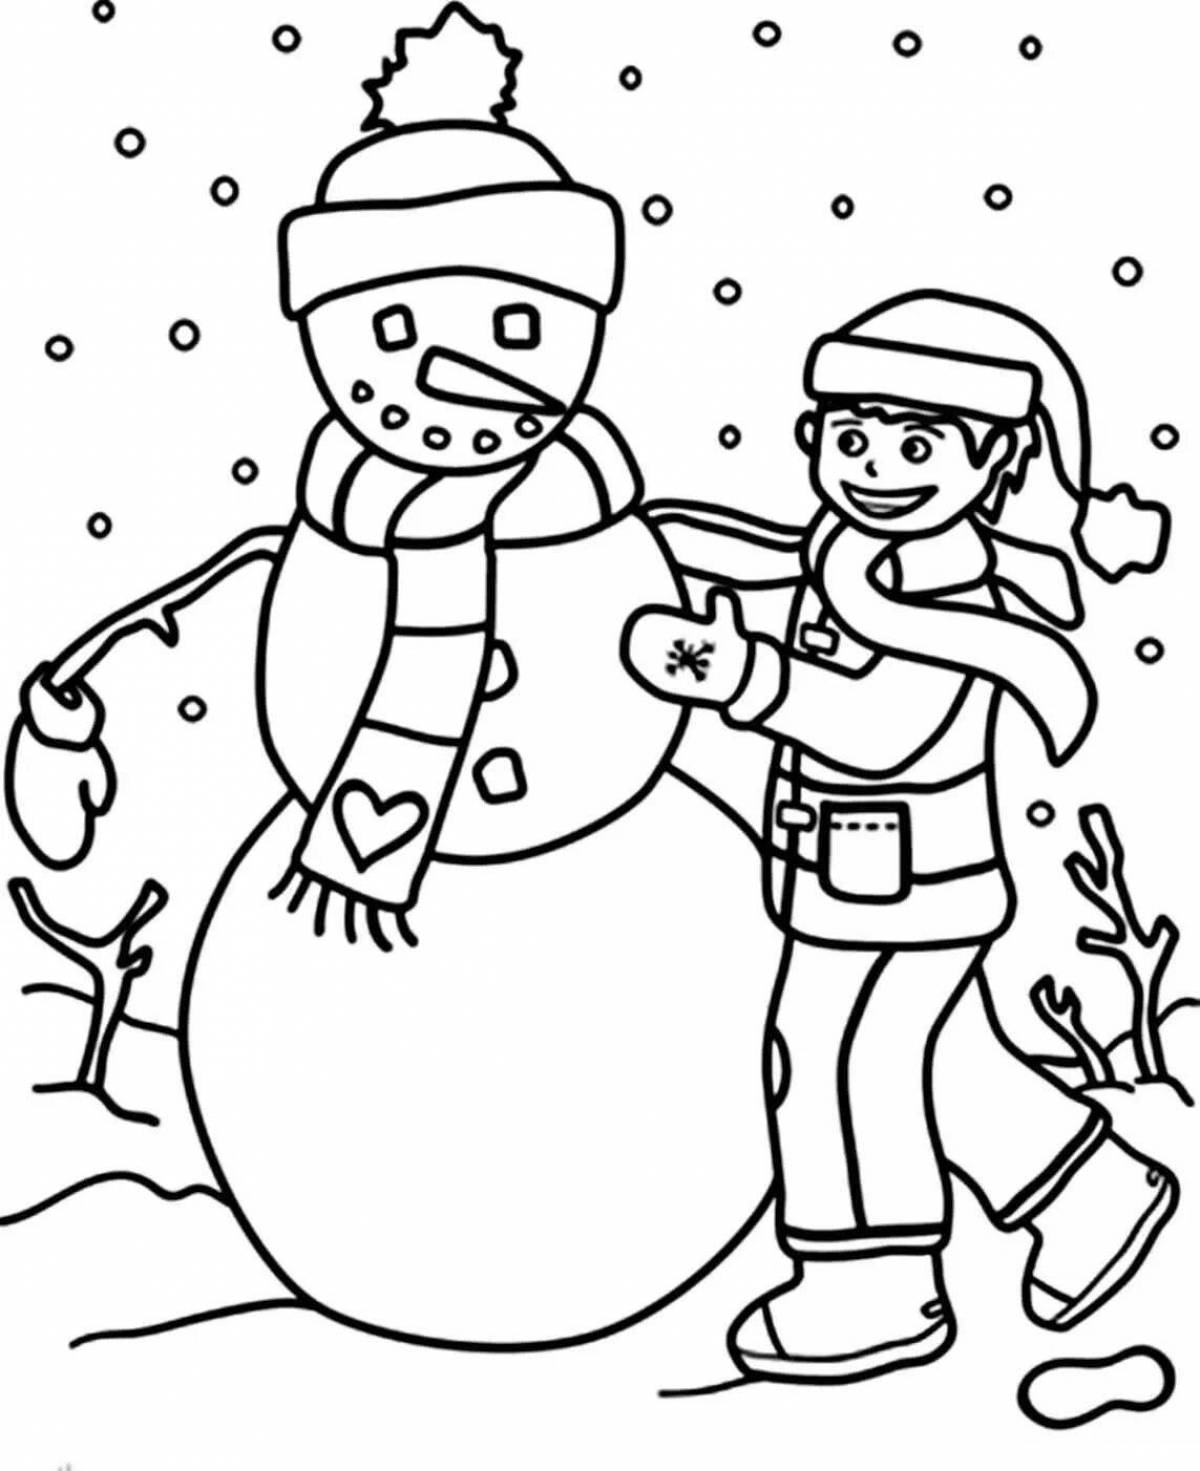 Serene winter coloring book for boys